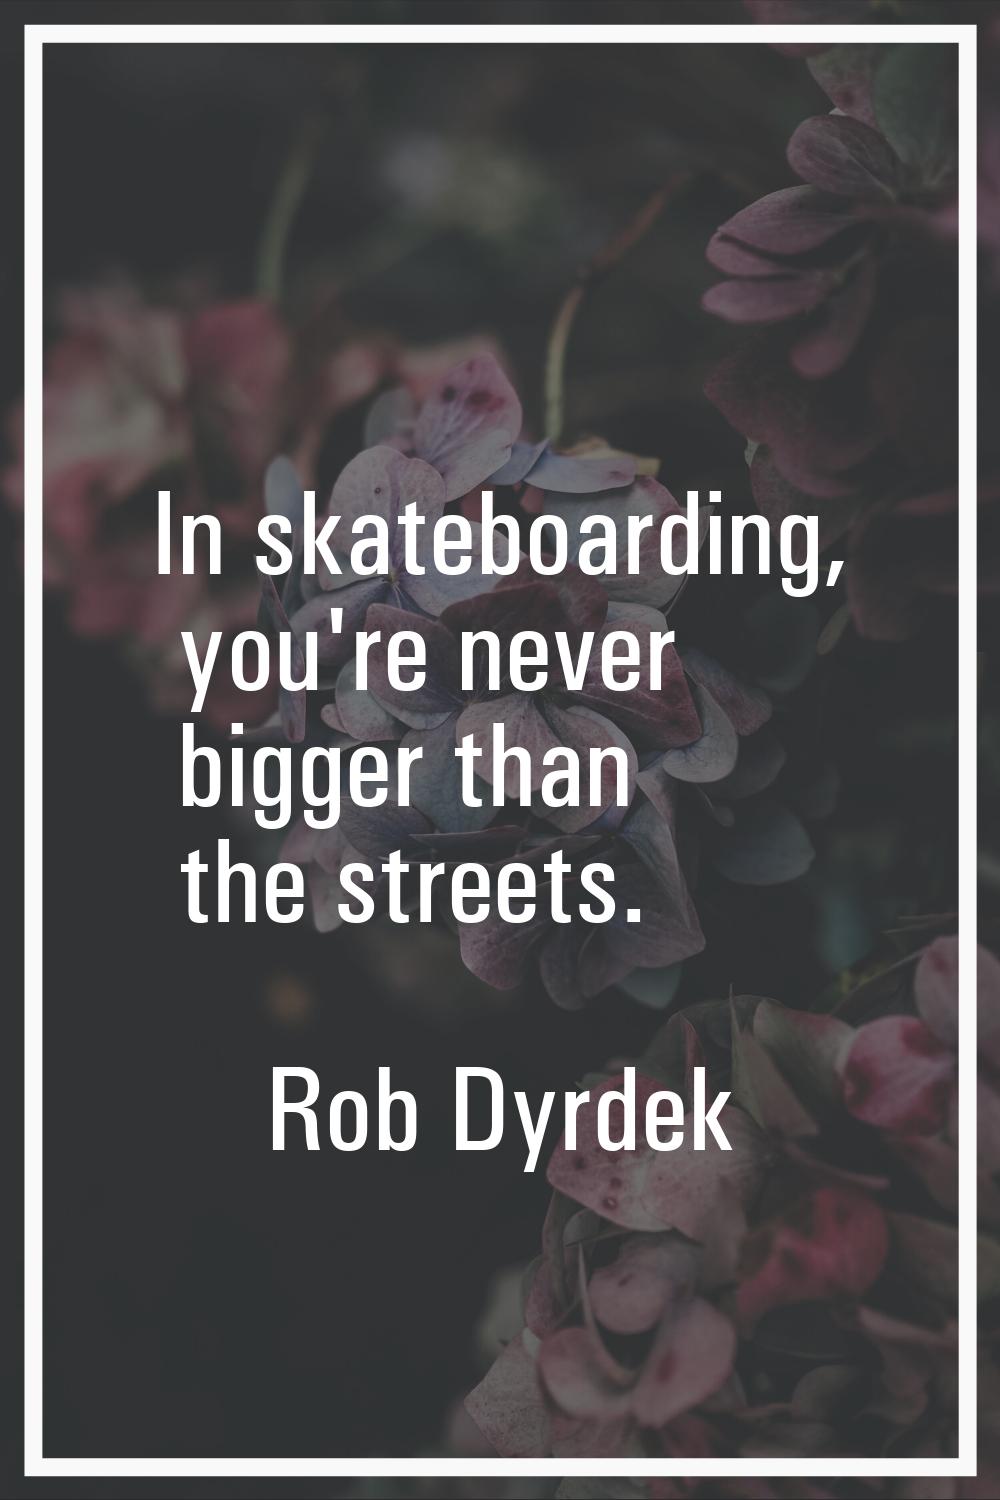 In skateboarding, you're never bigger than the streets.